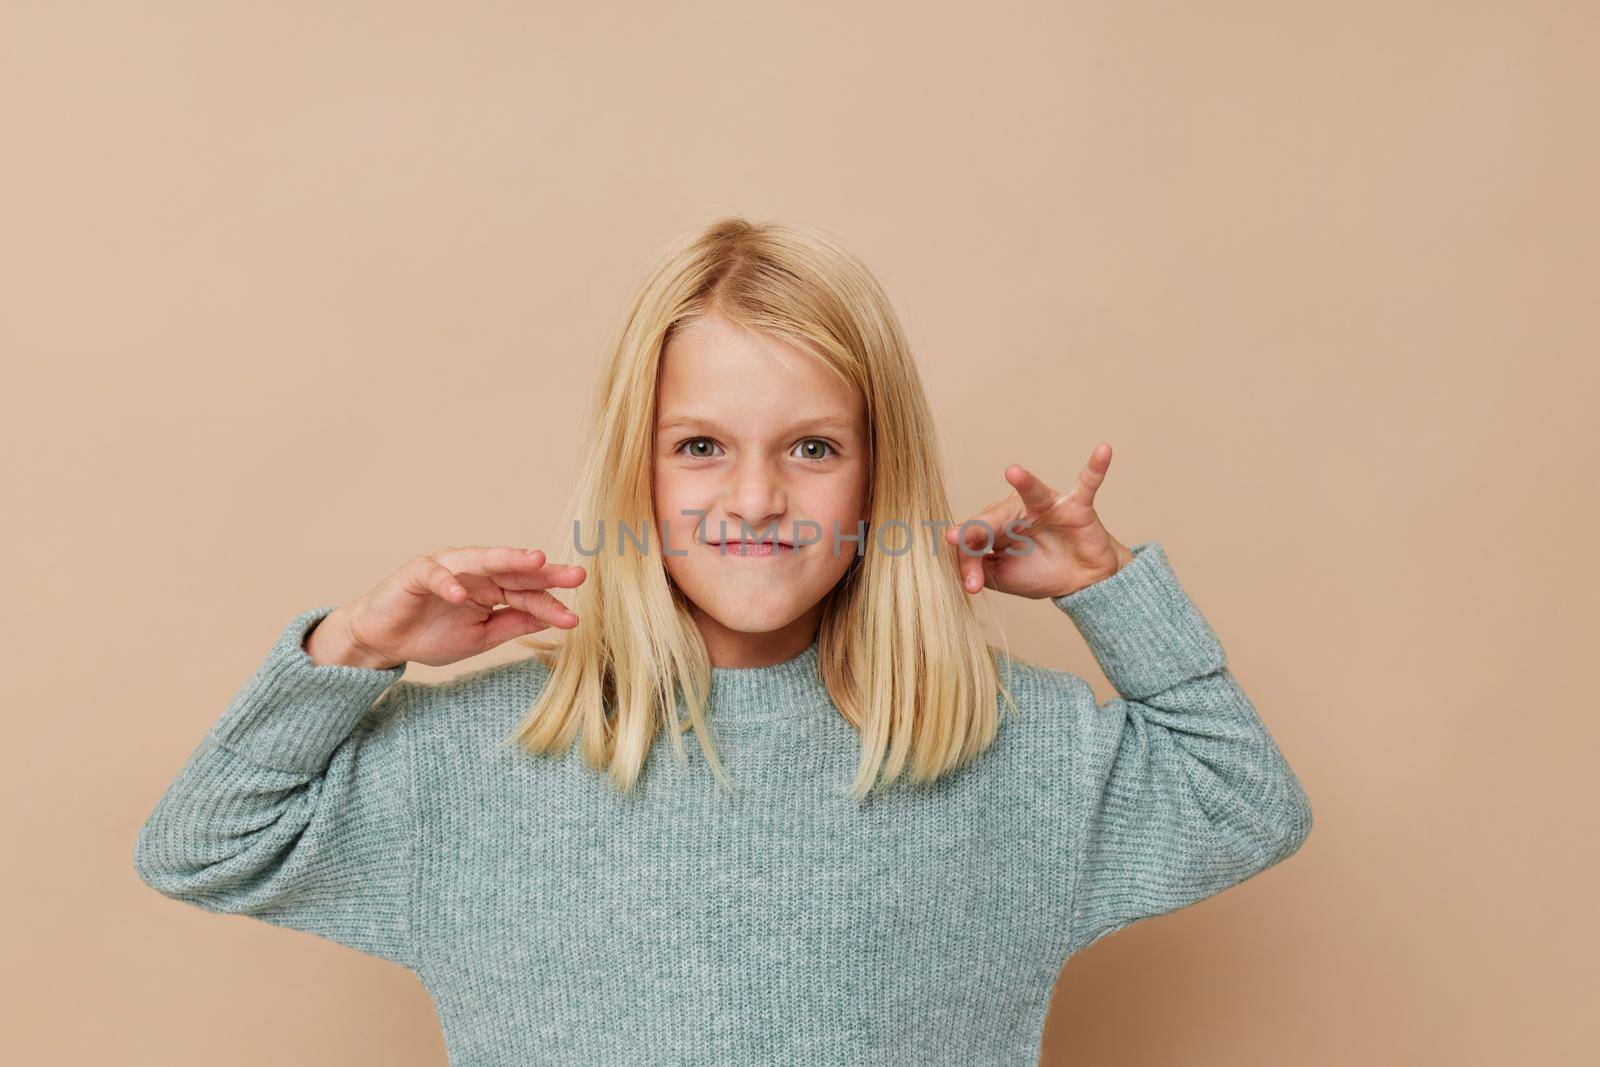 emotional girl in a sweater, grimaces kids lifestyle concept. High quality photo